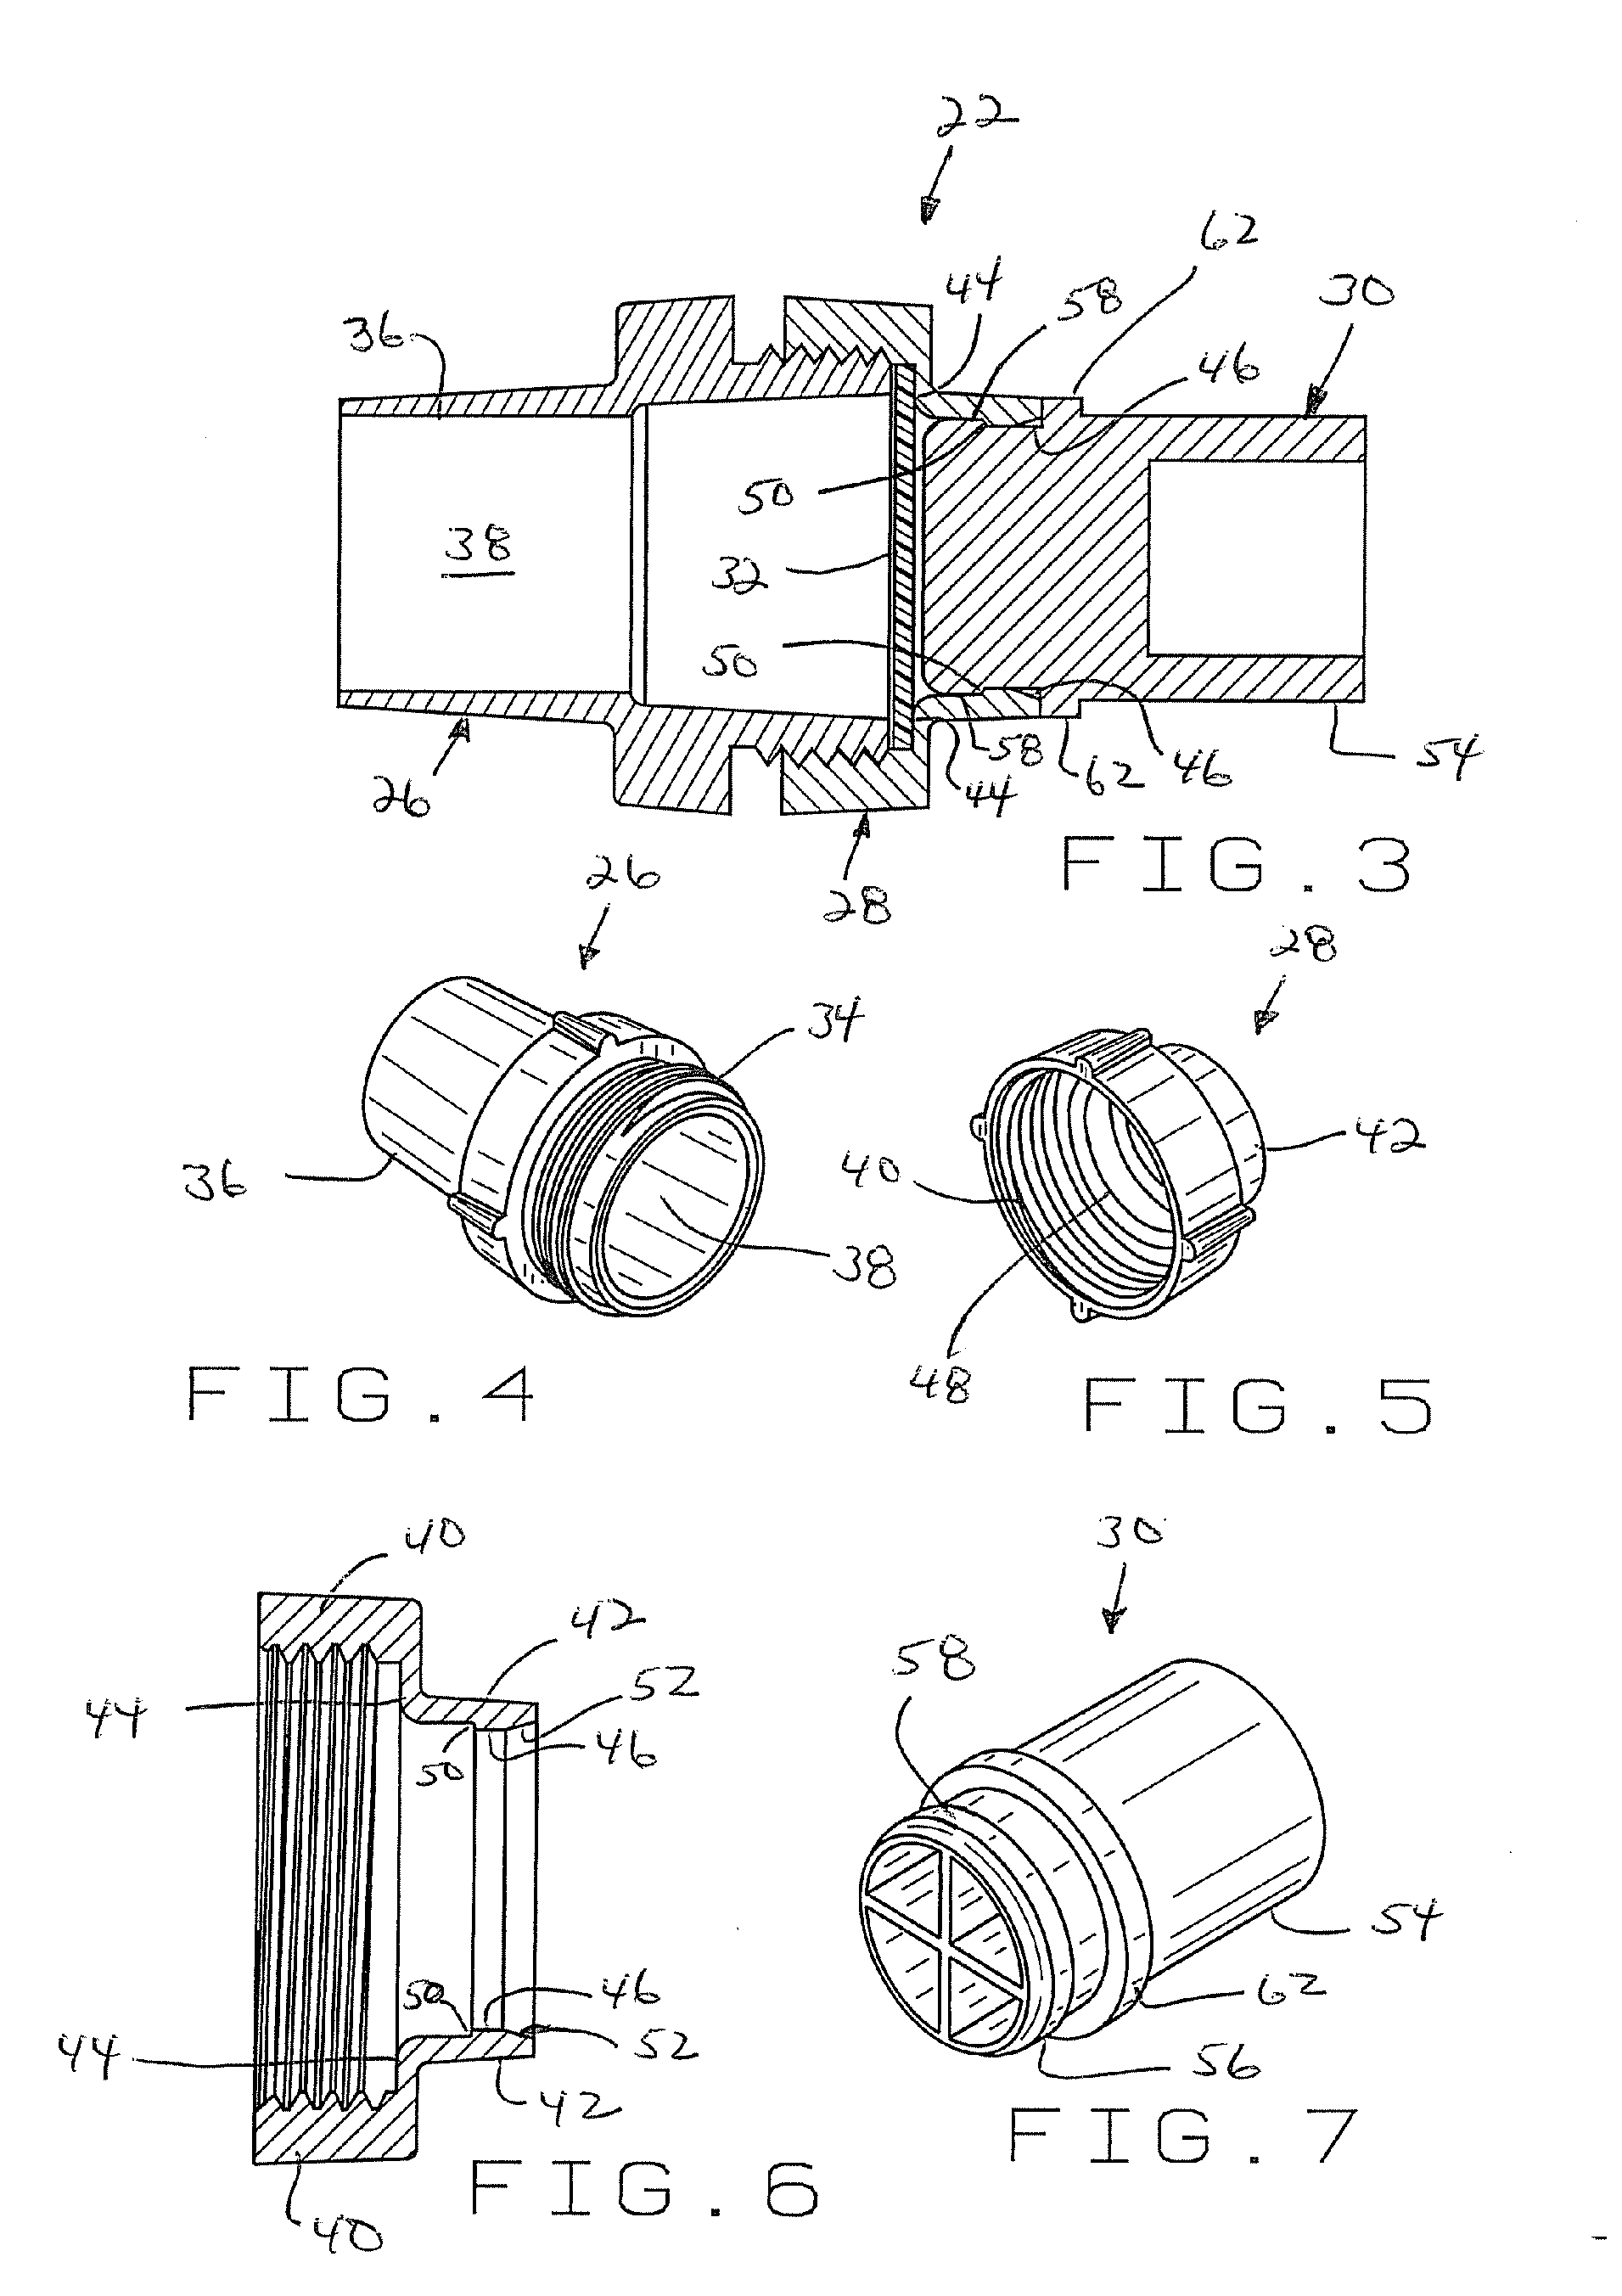 Swivel filter for use with sleep apnea and other respiratory equipment including associated interface systems